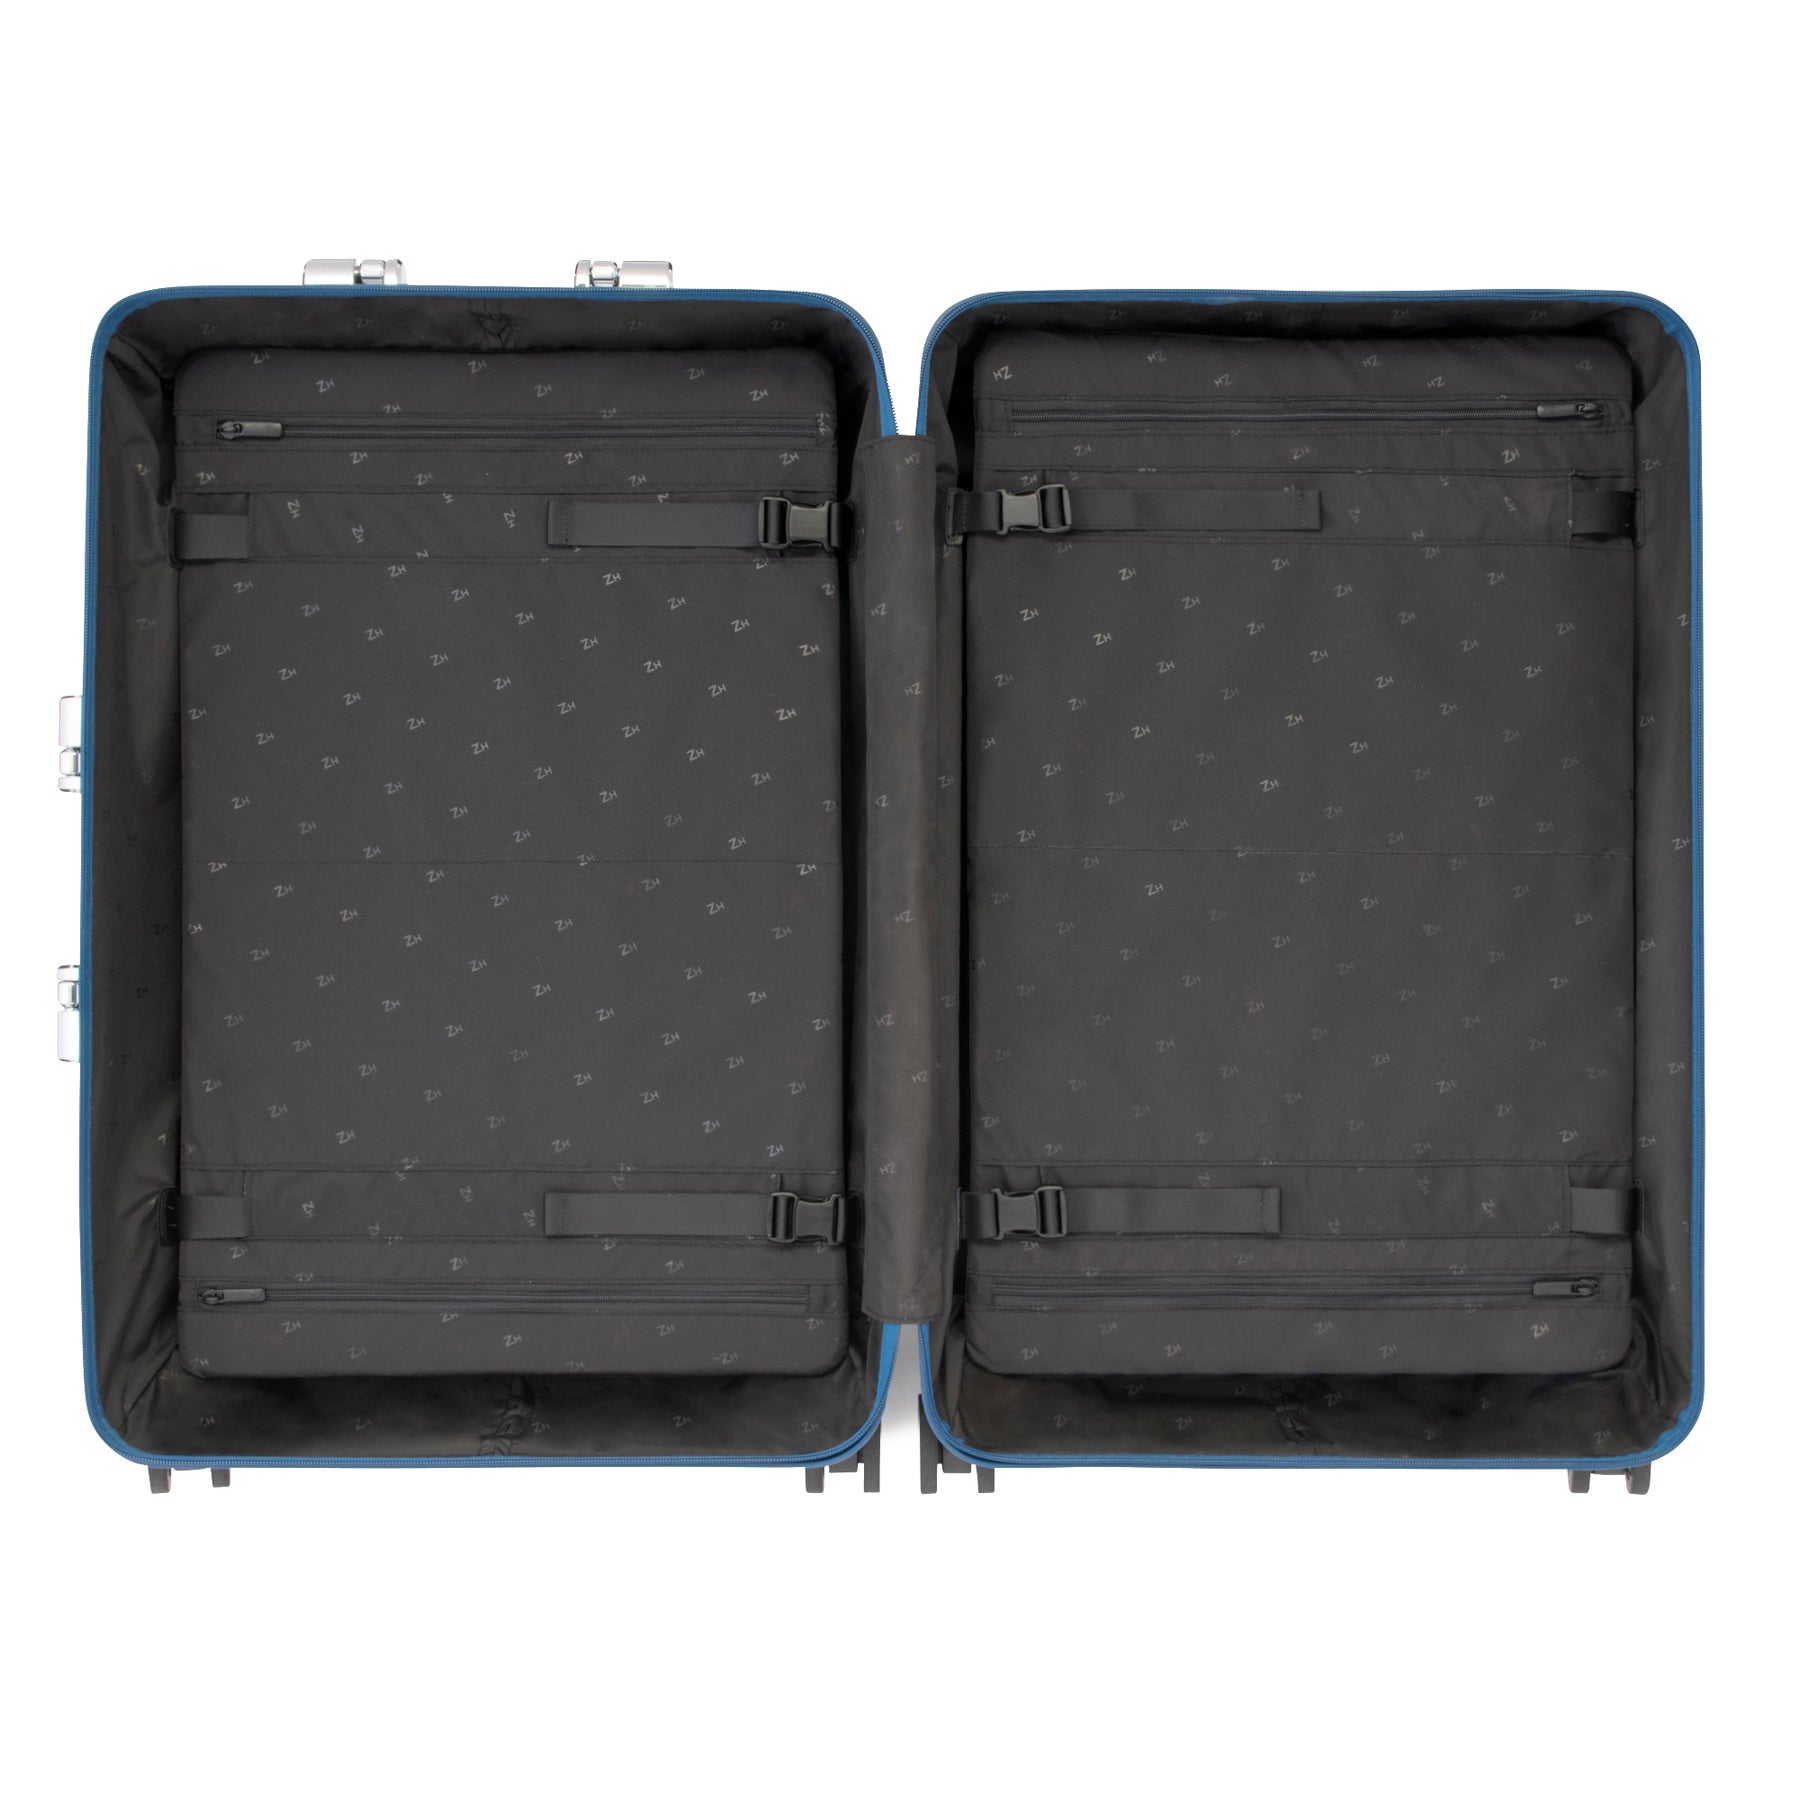 Classic Lightweight 3.0 | Check-In-M Travel Case 63L 81284/81289